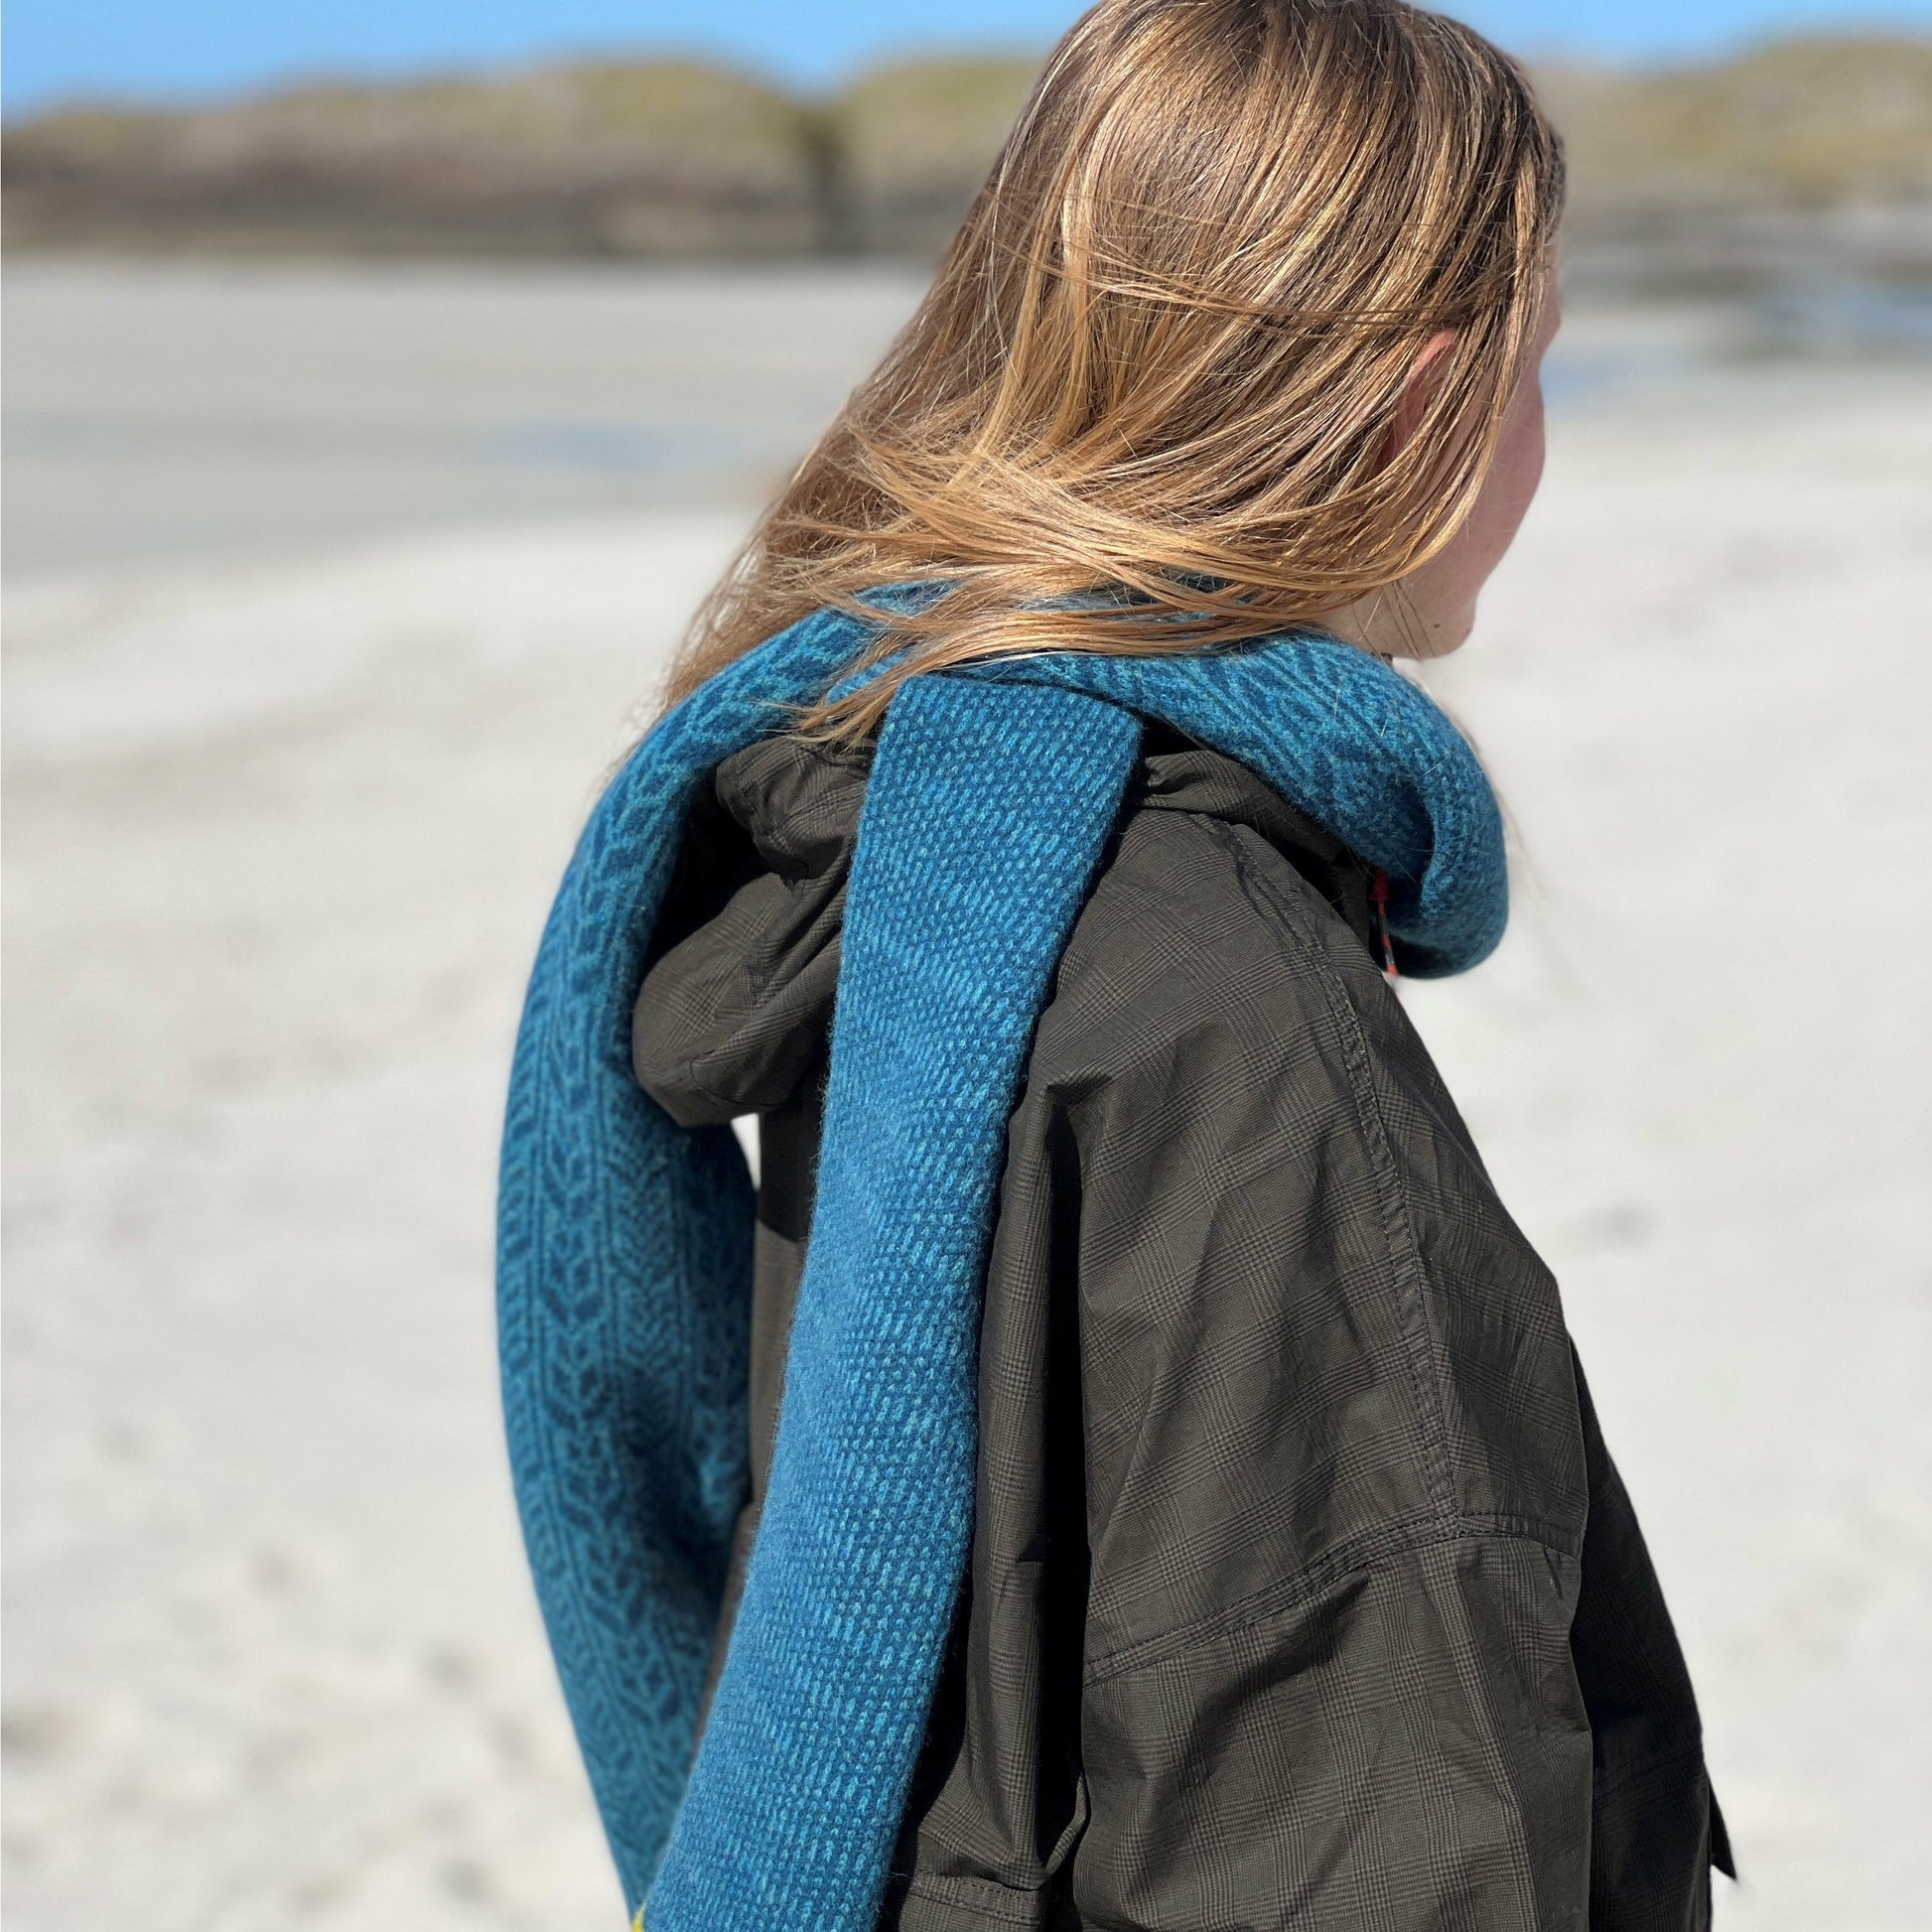 The Treshnish Windsmock is made from a lightweight 100% Organic Cotton made by Halley Stevensons of Dundee.  The colour here is Forest Night.  This coat is windproof and  showerproof but not waterproof in heavy rain.